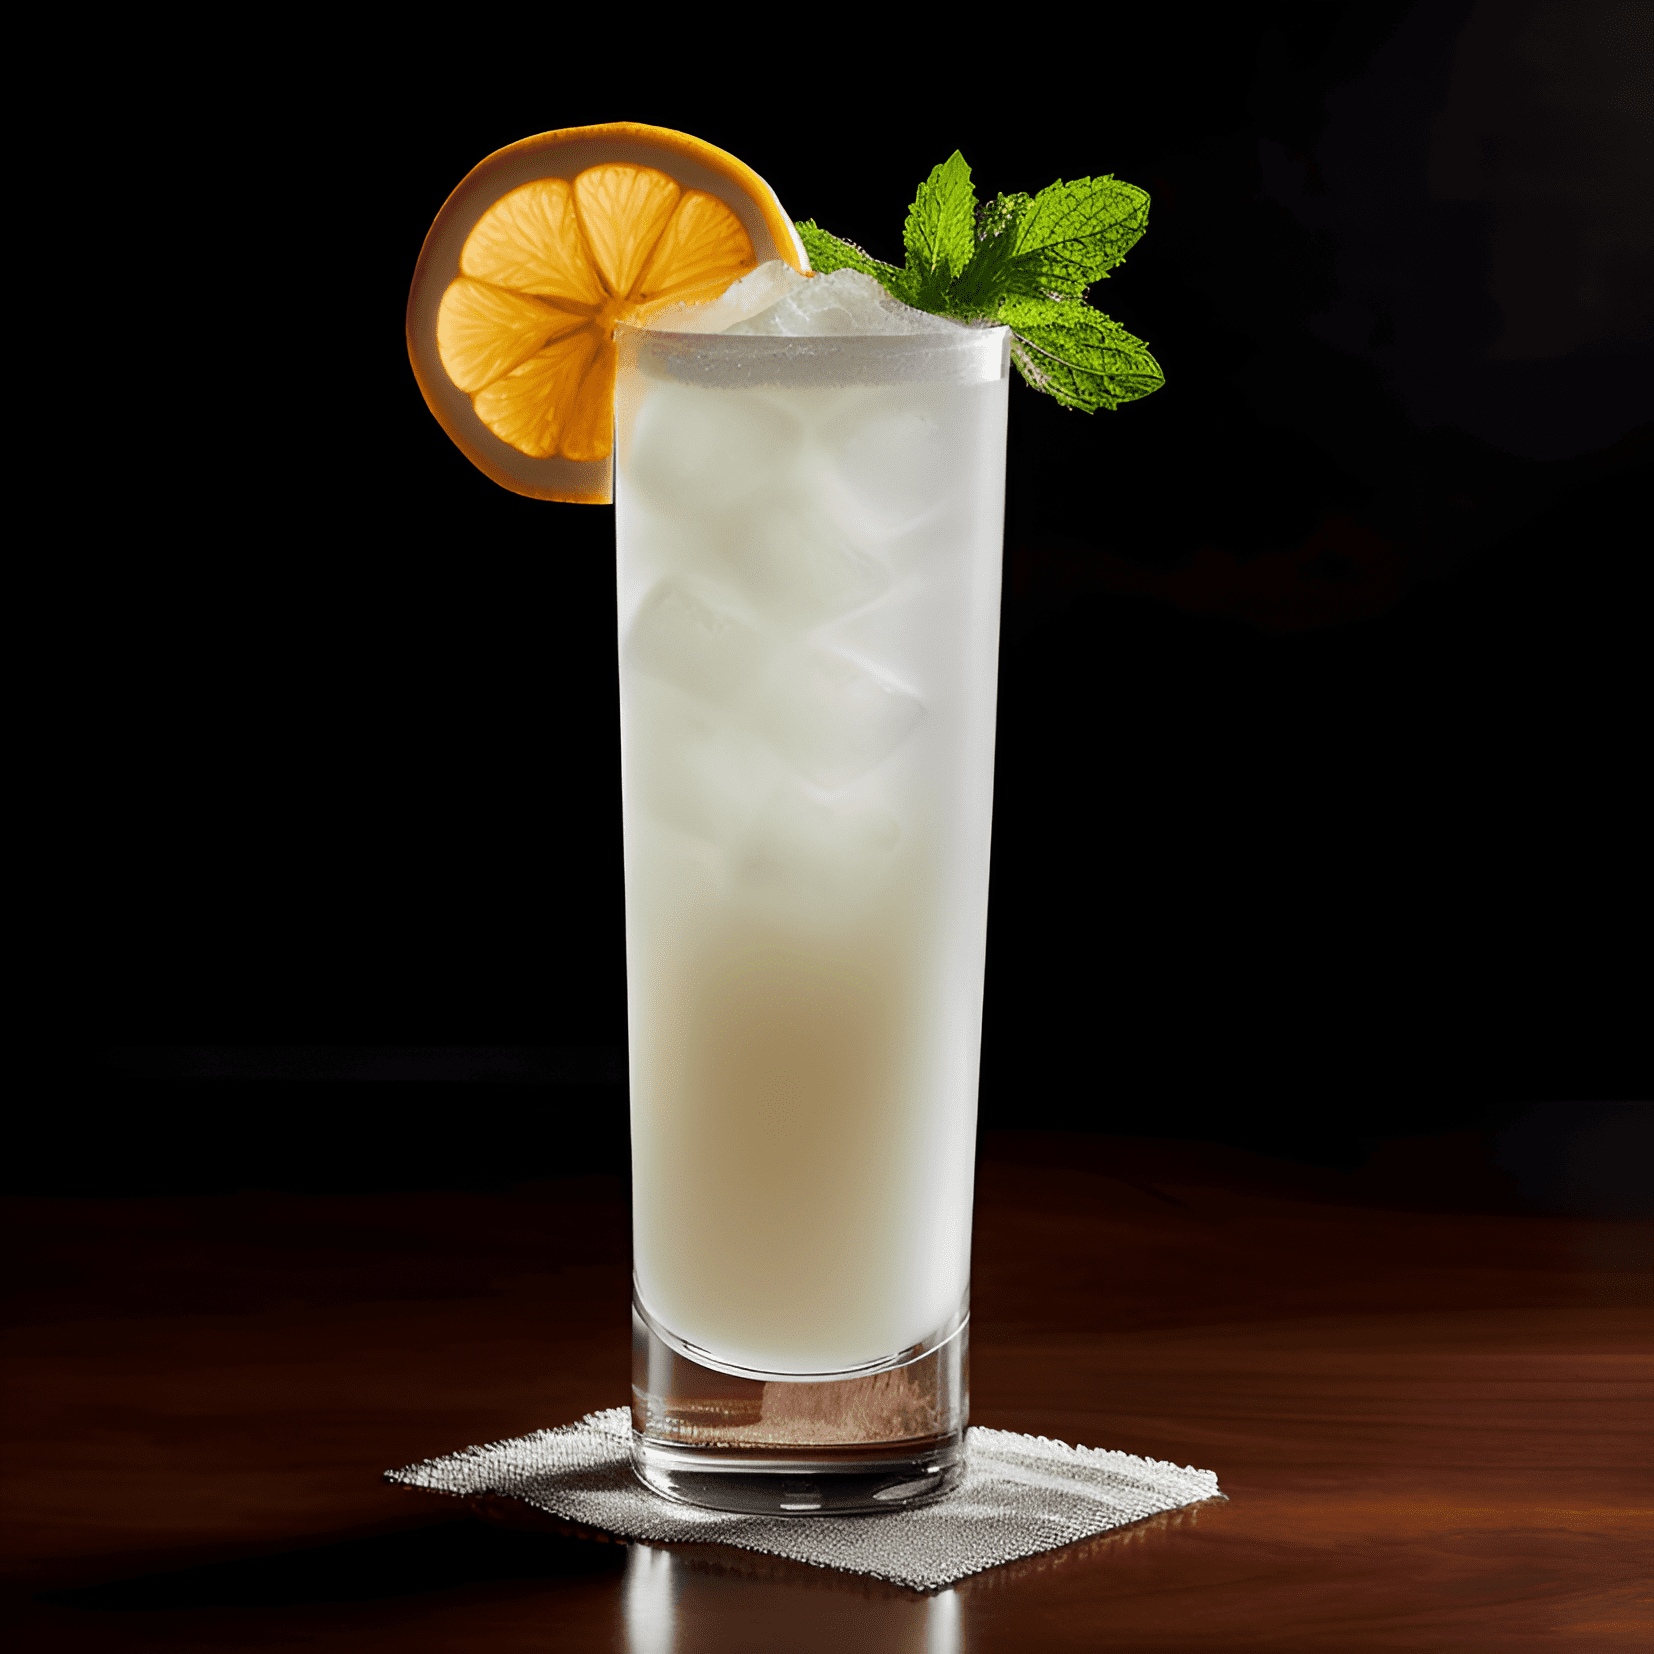 Ramos Gin Fizz Cocktail Recipe - The Ramos Gin Fizz has a creamy, frothy texture with a balanced taste of sweet, sour, and floral notes. The gin provides a subtle juniper flavor, while the citrus and egg white create a smooth, velvety mouthfeel.